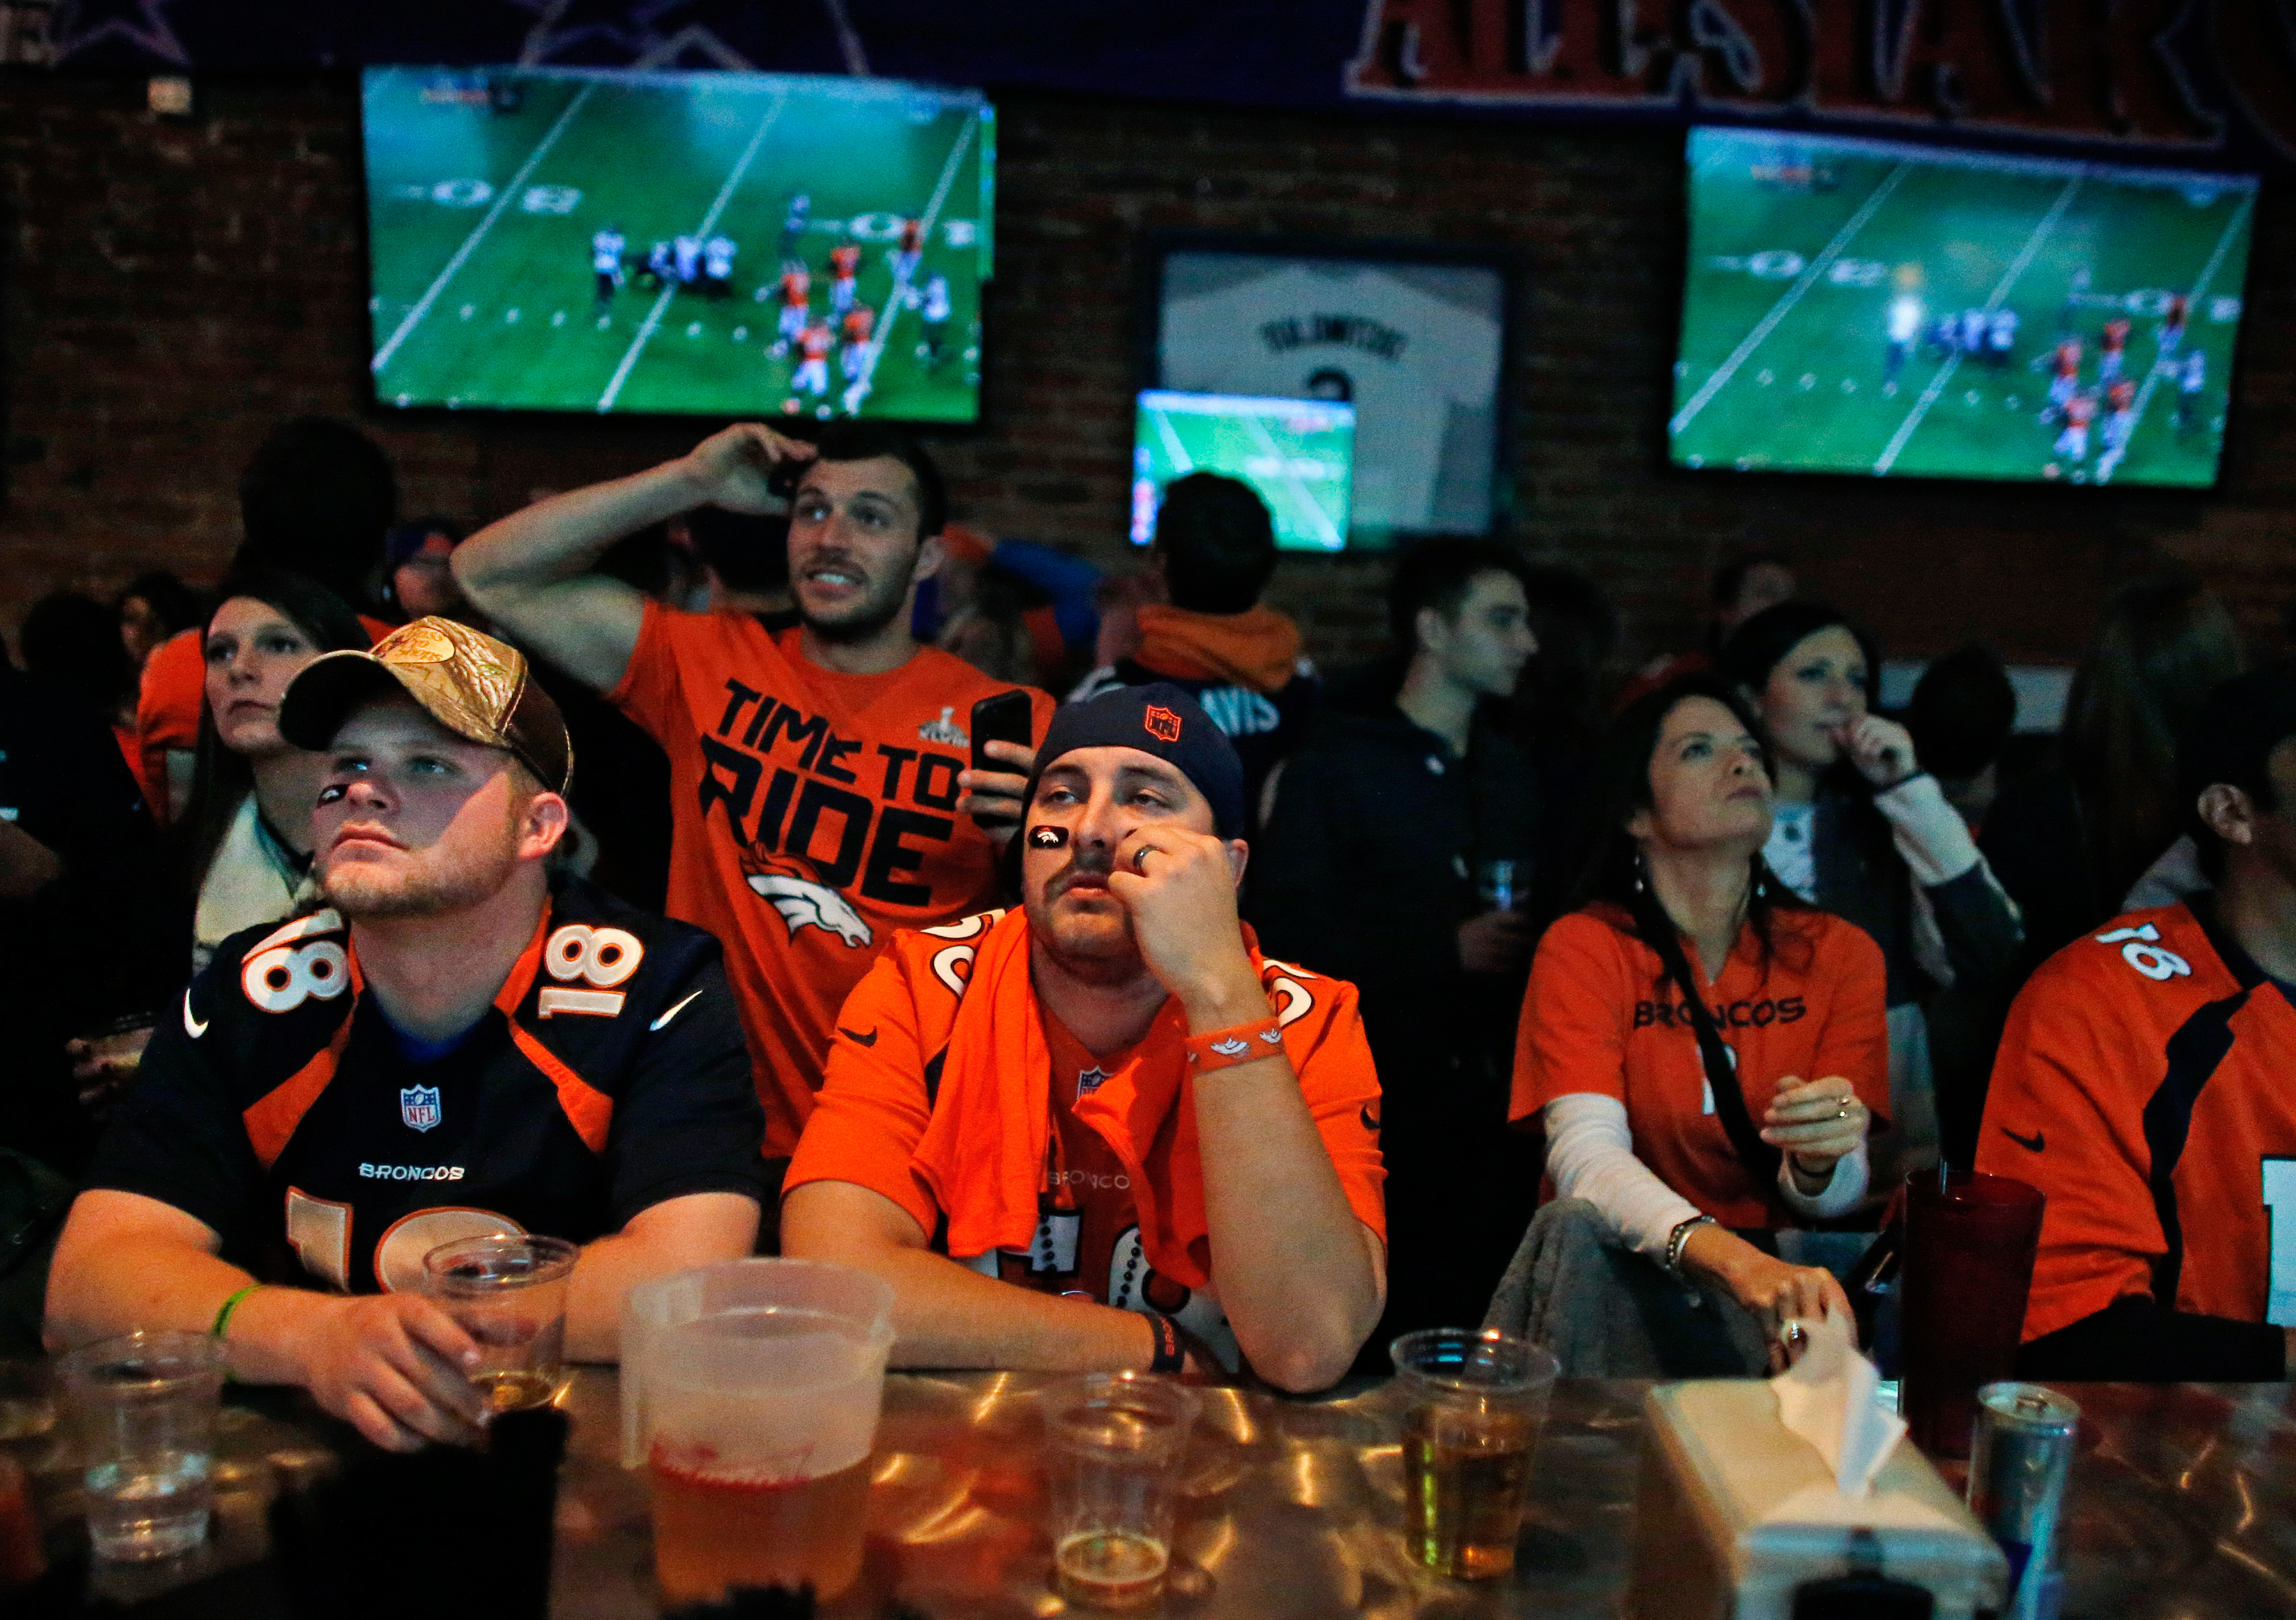 Denver Broncos fans watch their team play the Seahawks during the first half of the Super Bowl, inside Jackson's, a sports bar and grill in Denver.